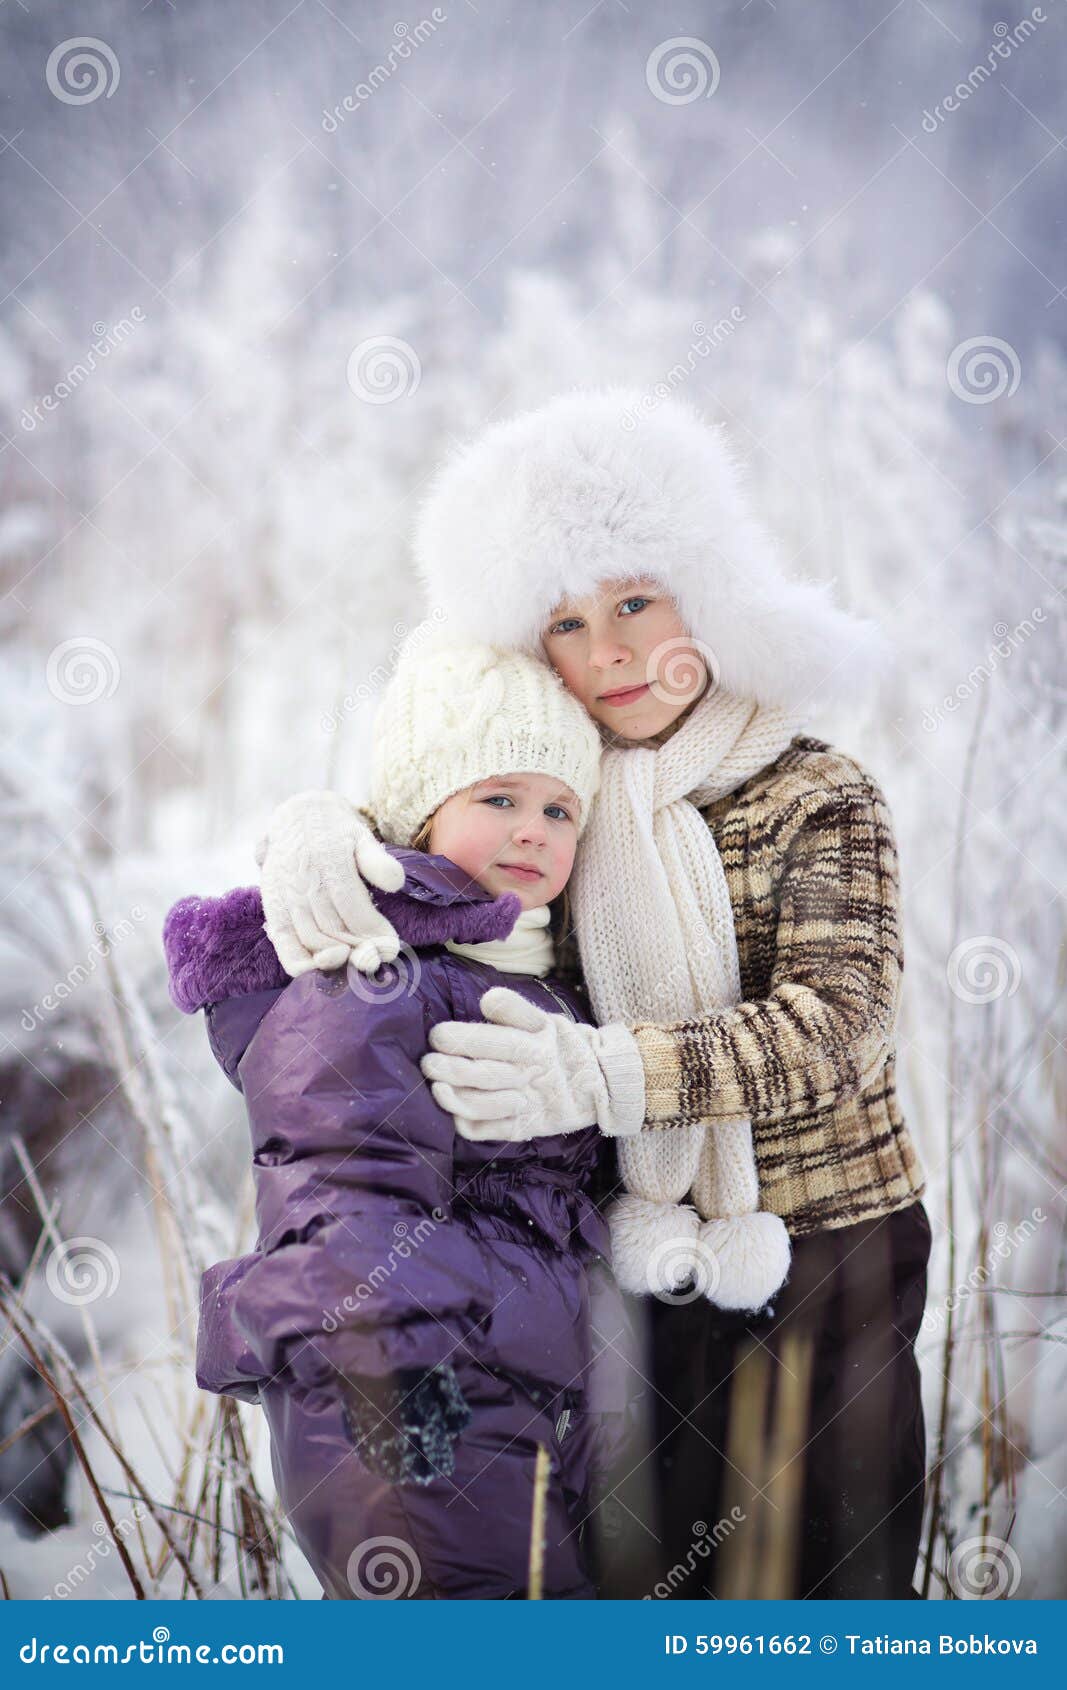 Kids in winter stock photo. Image of blizzard, happiness - 59961662